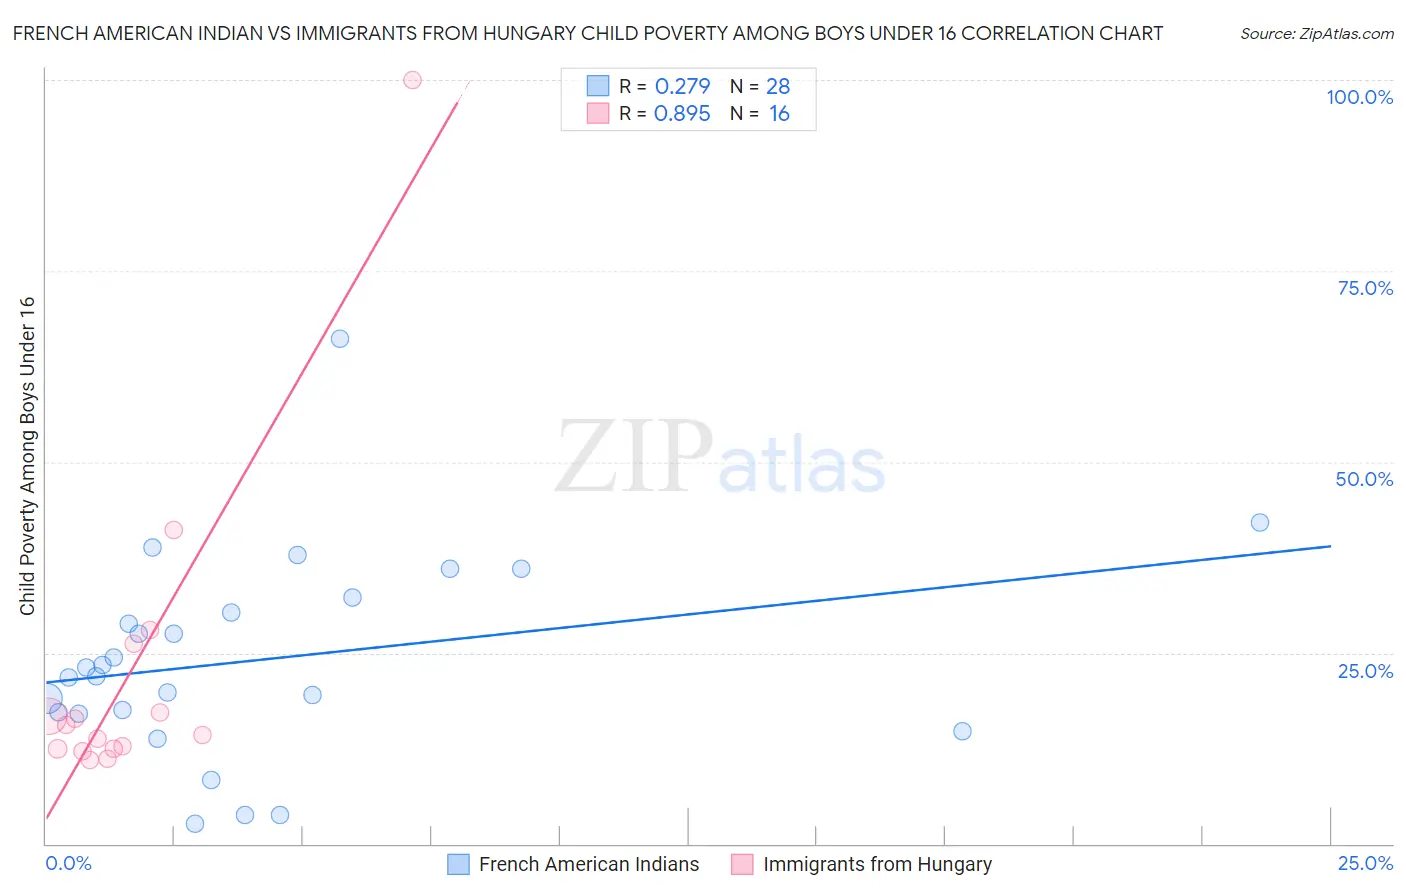 French American Indian vs Immigrants from Hungary Child Poverty Among Boys Under 16